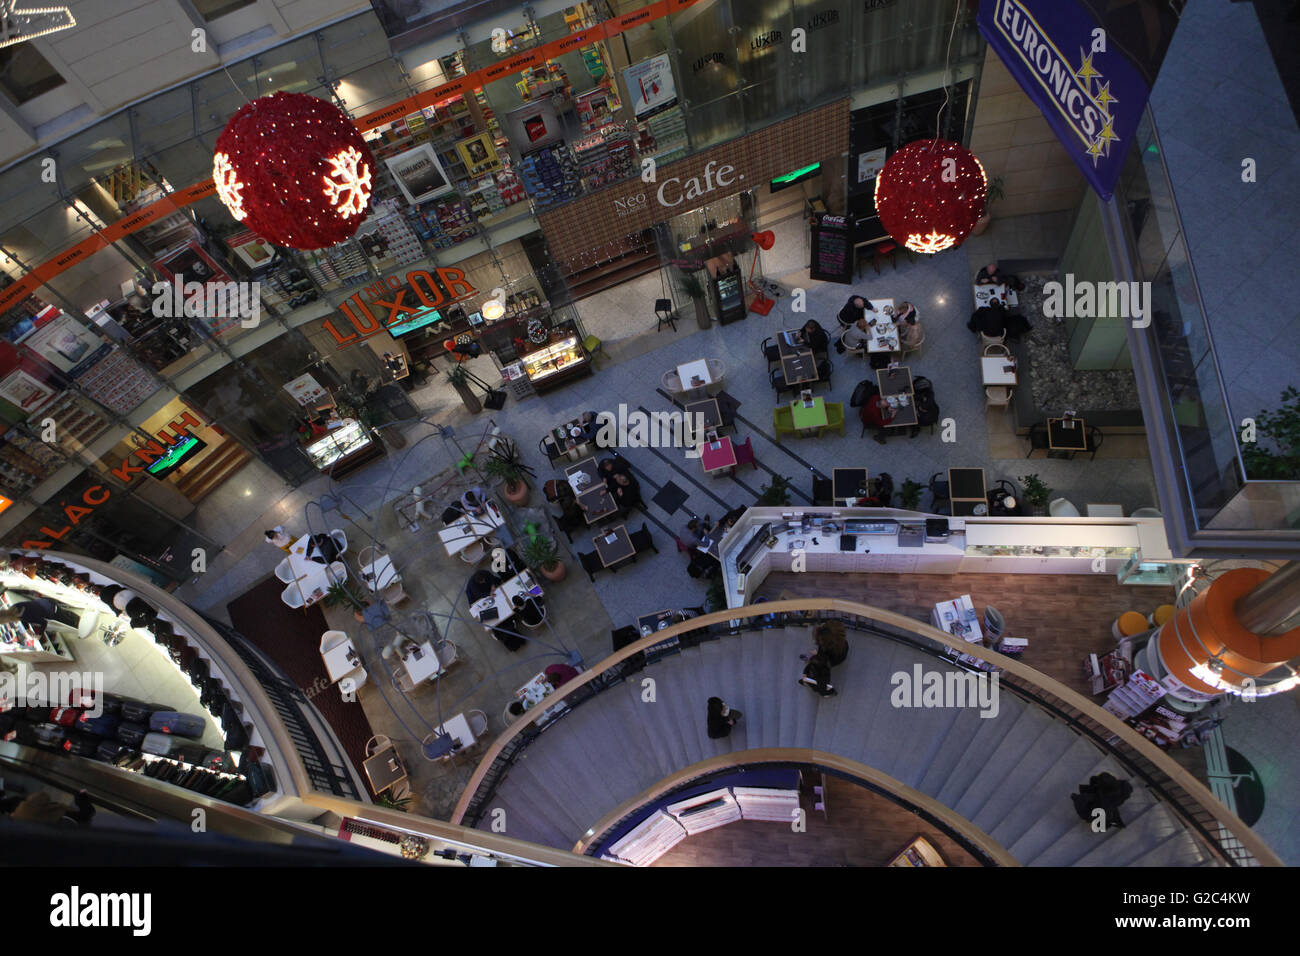 Palladium Shopping Mall High Resolution Stock Photography and Images - Alamy